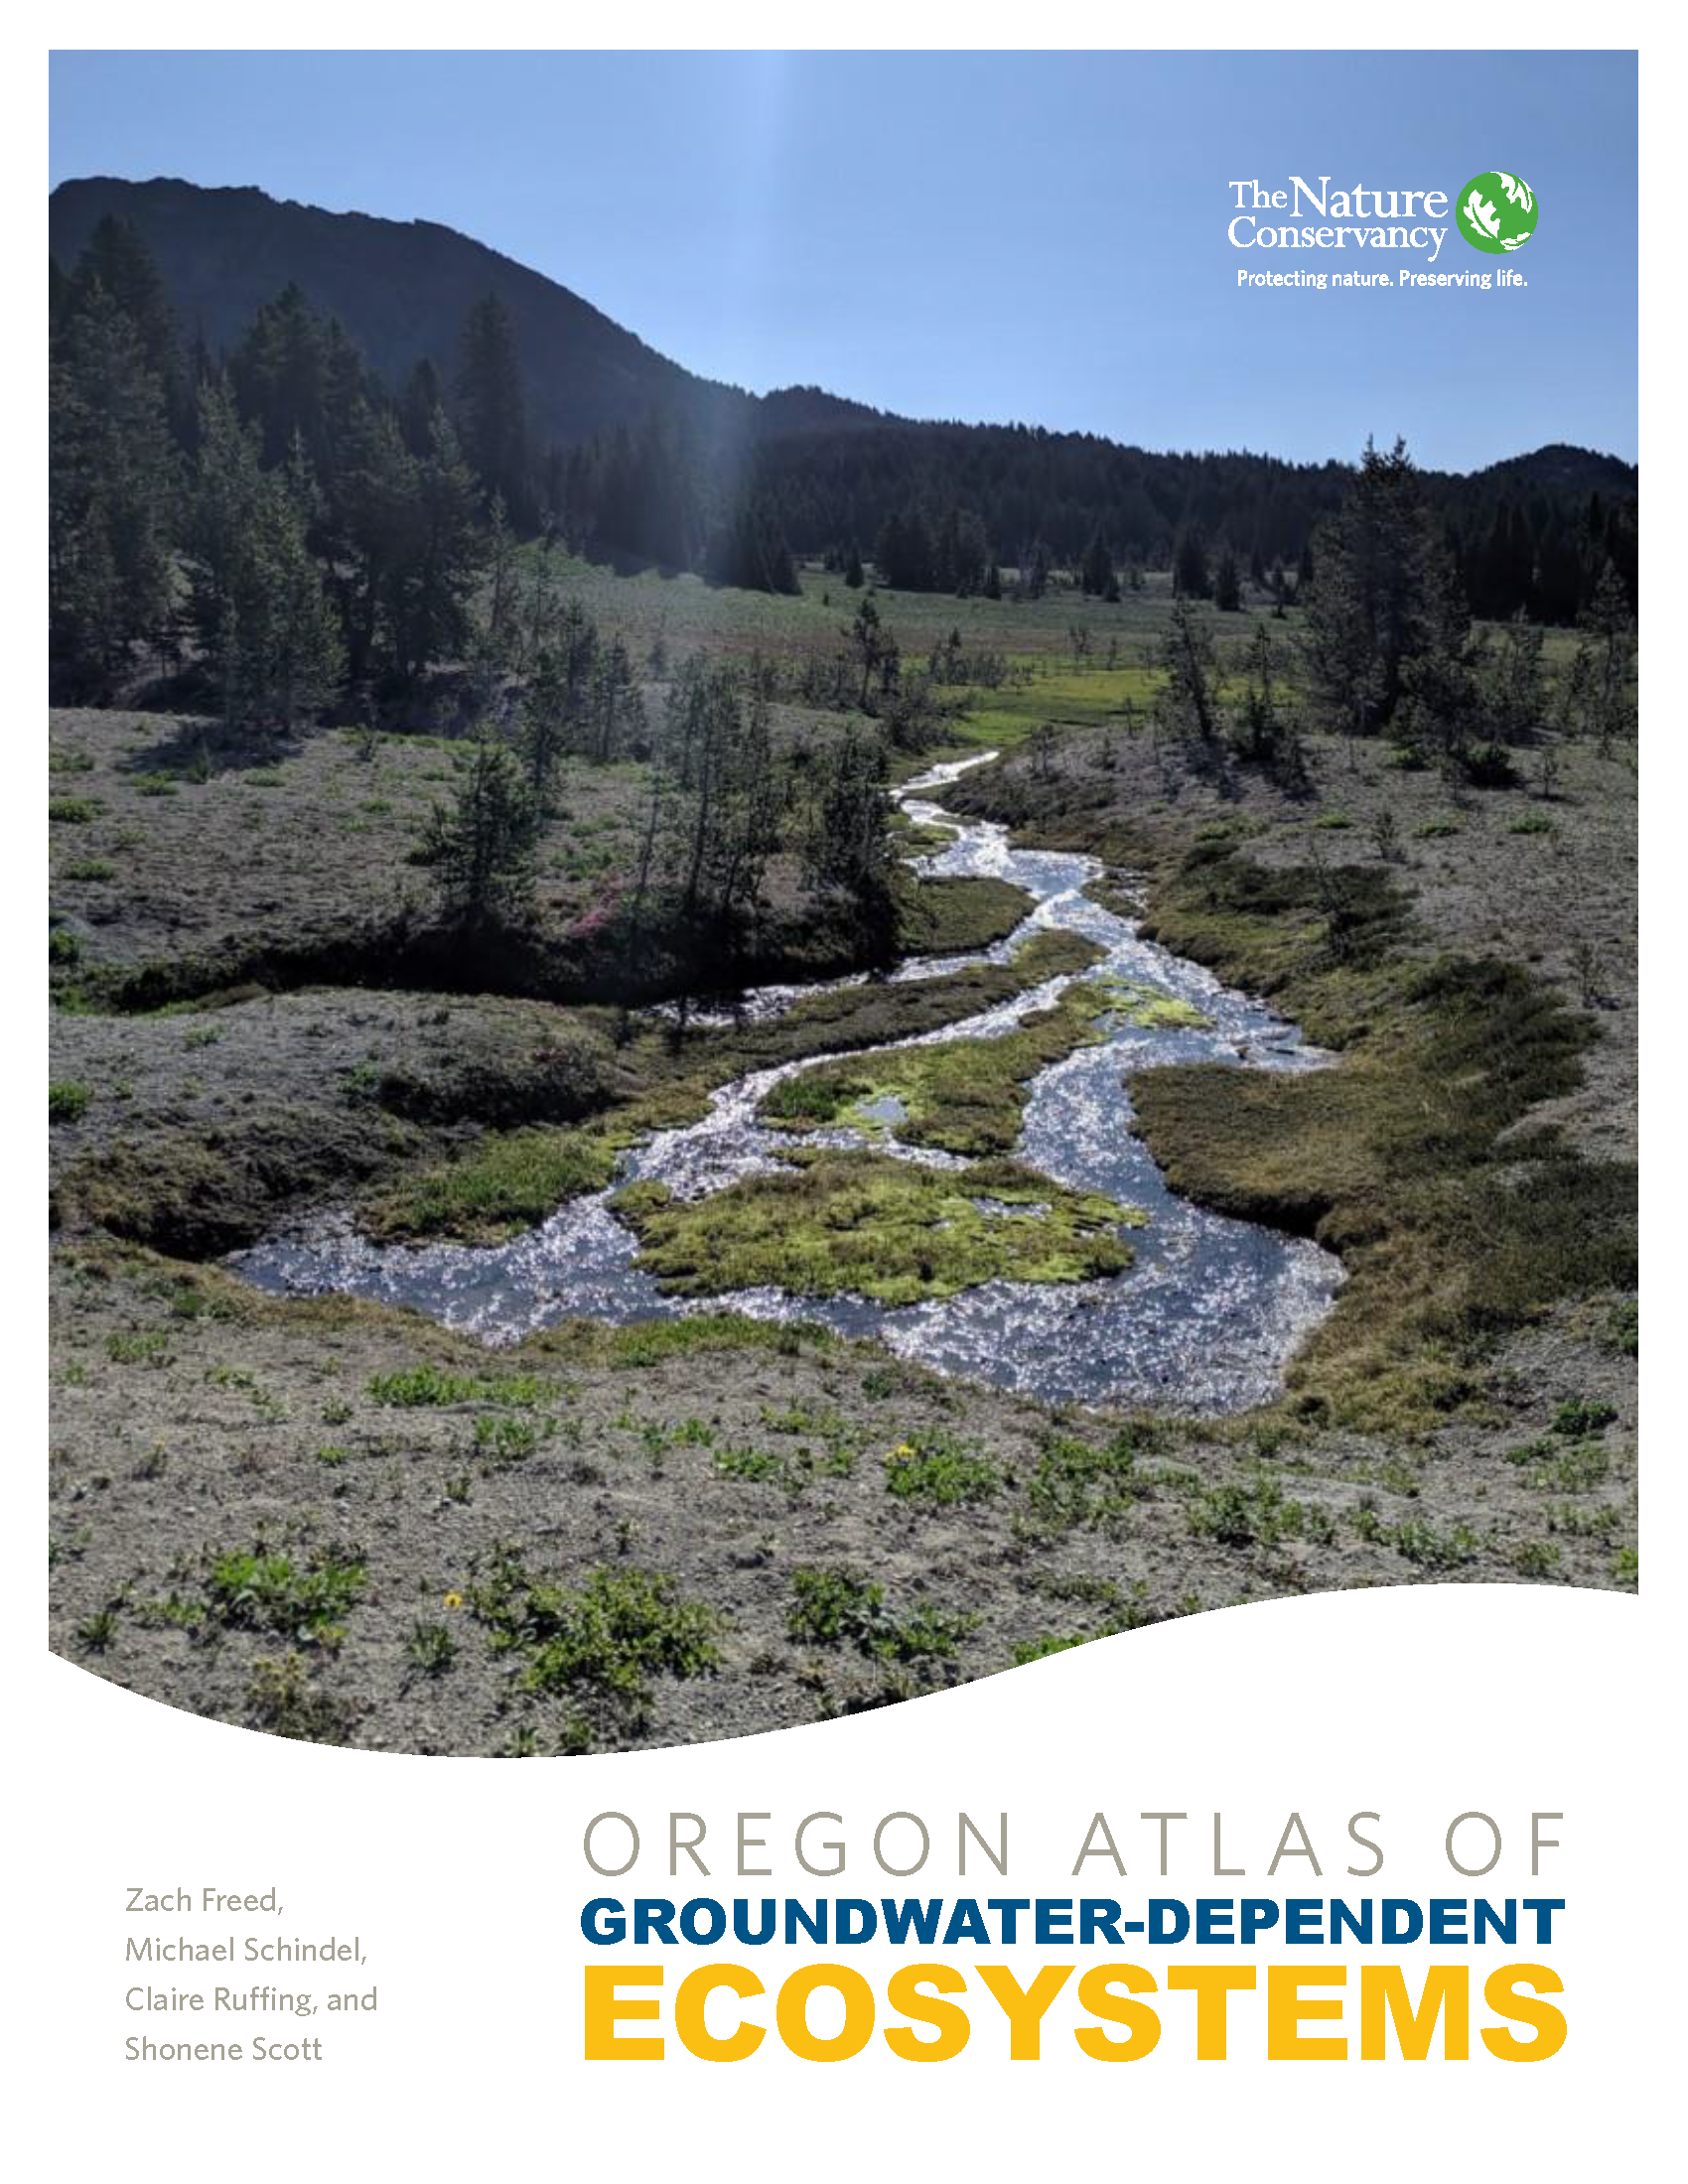 This report assesses multiple indicators of groundwater-dependence in five types of groundwater-dependent ecosystems across Oregon, as well as stressors and threats.